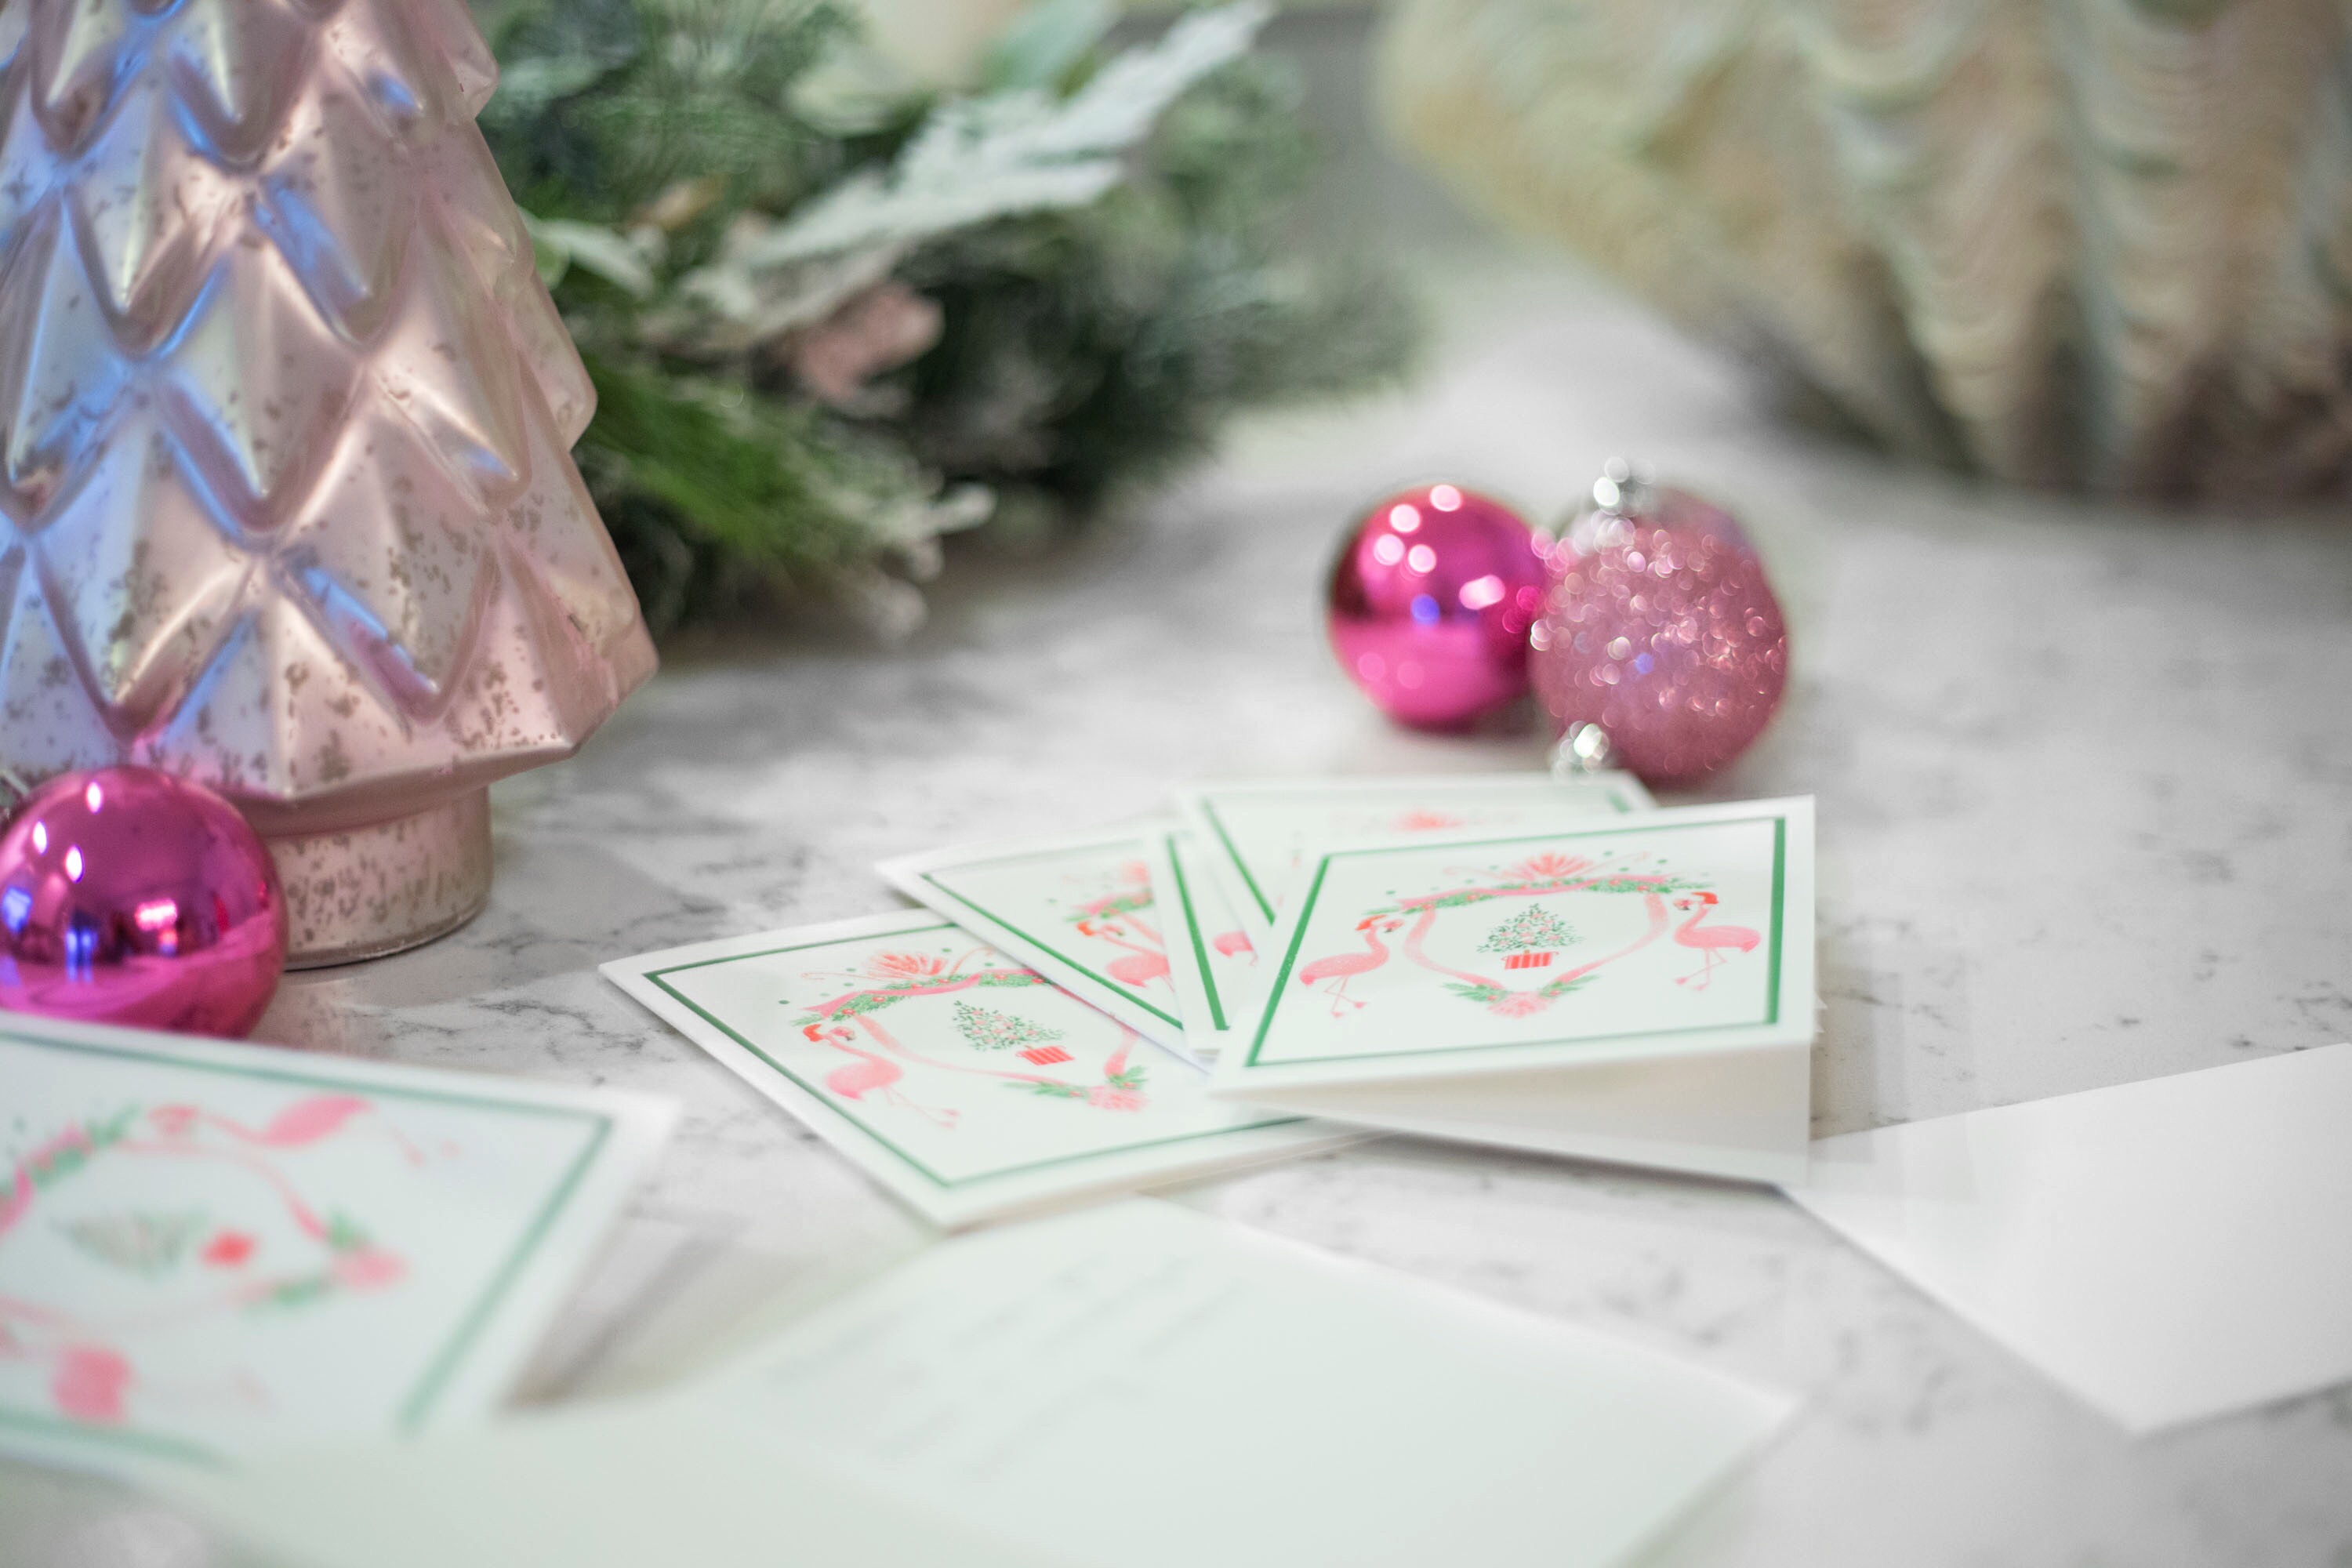 Florida lifestyle blogger, MikaelaJ, shares a look at Giddy Paperie. Giddy Paperie has the most gorgeous designs and would make the perfect gift!